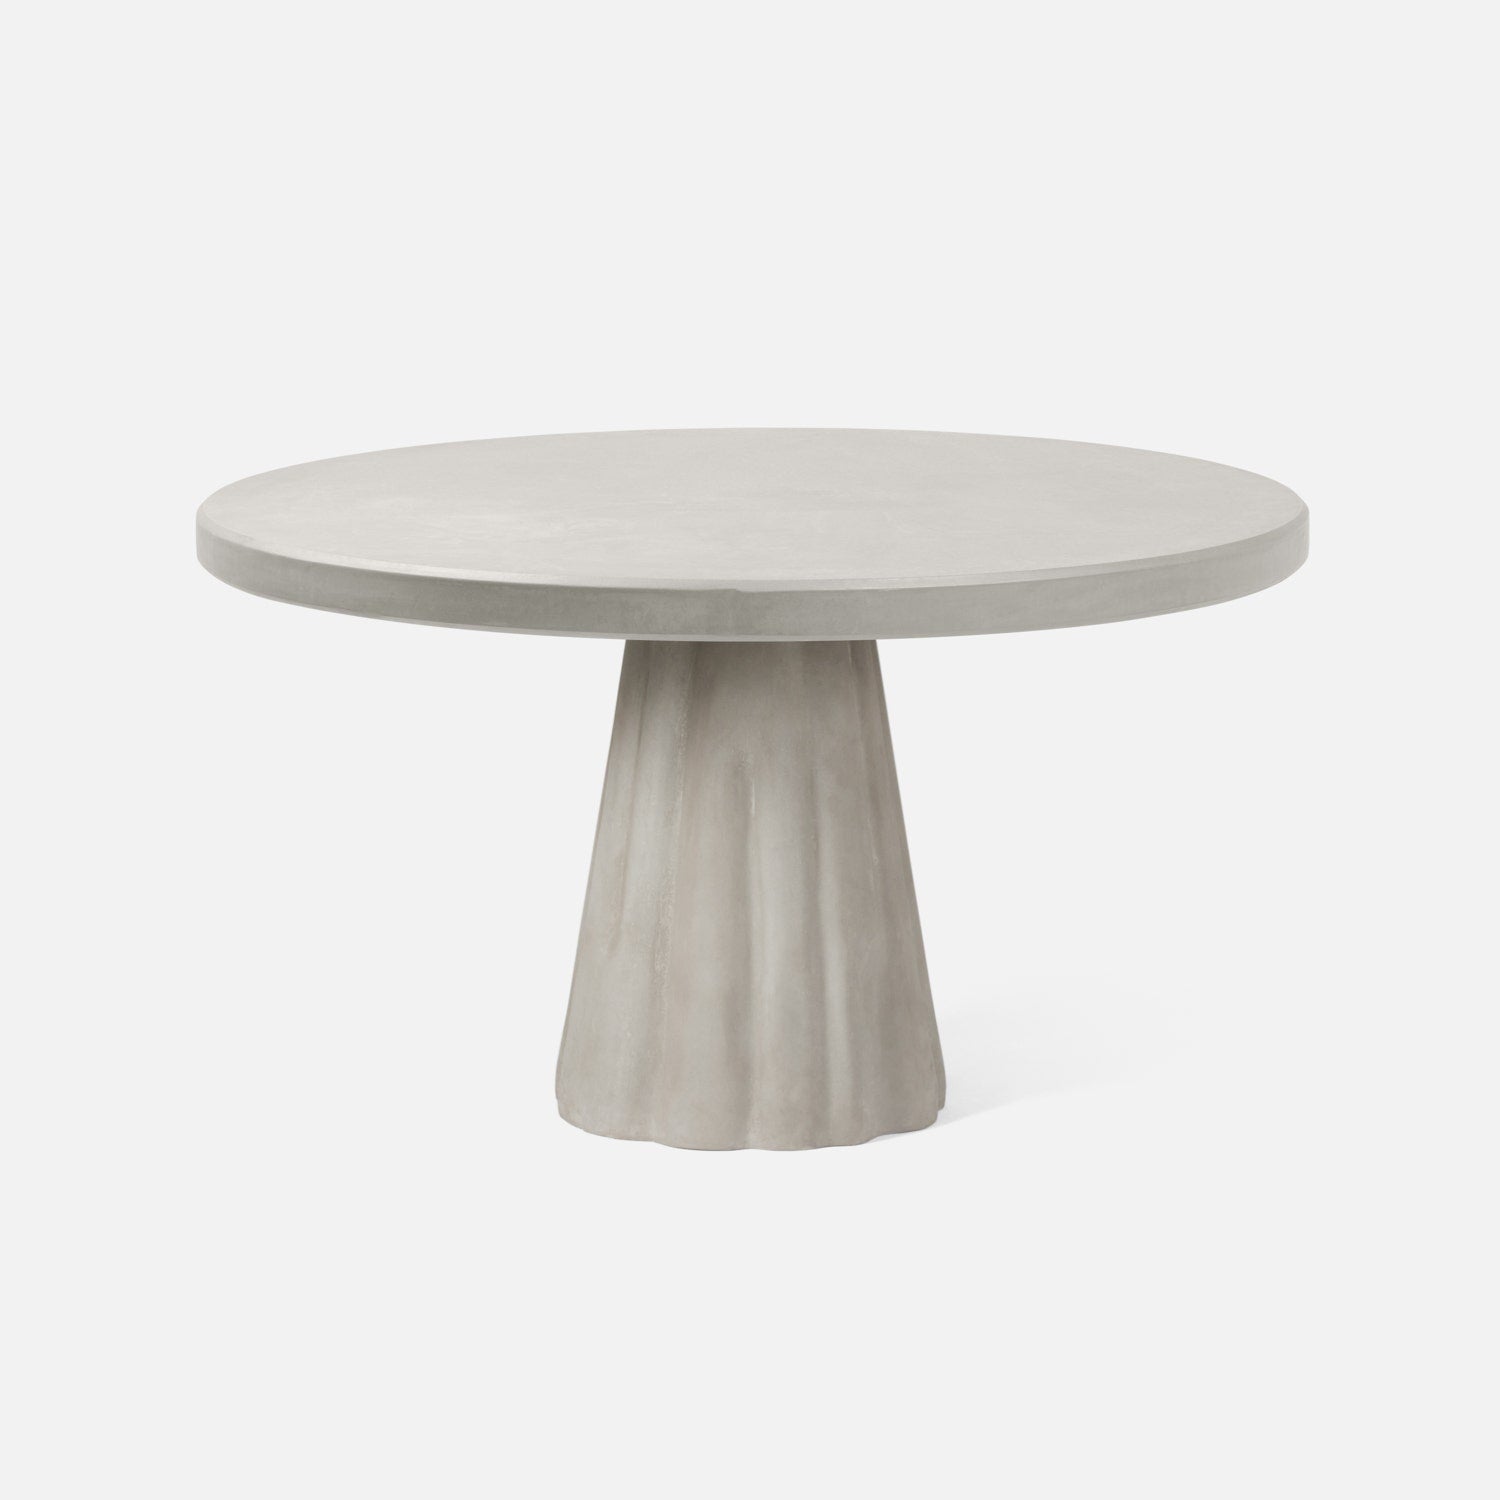 Made Goods Grady 48" x 30" Light Gray Reconstituted Stone Dinning Table With Round Table Top